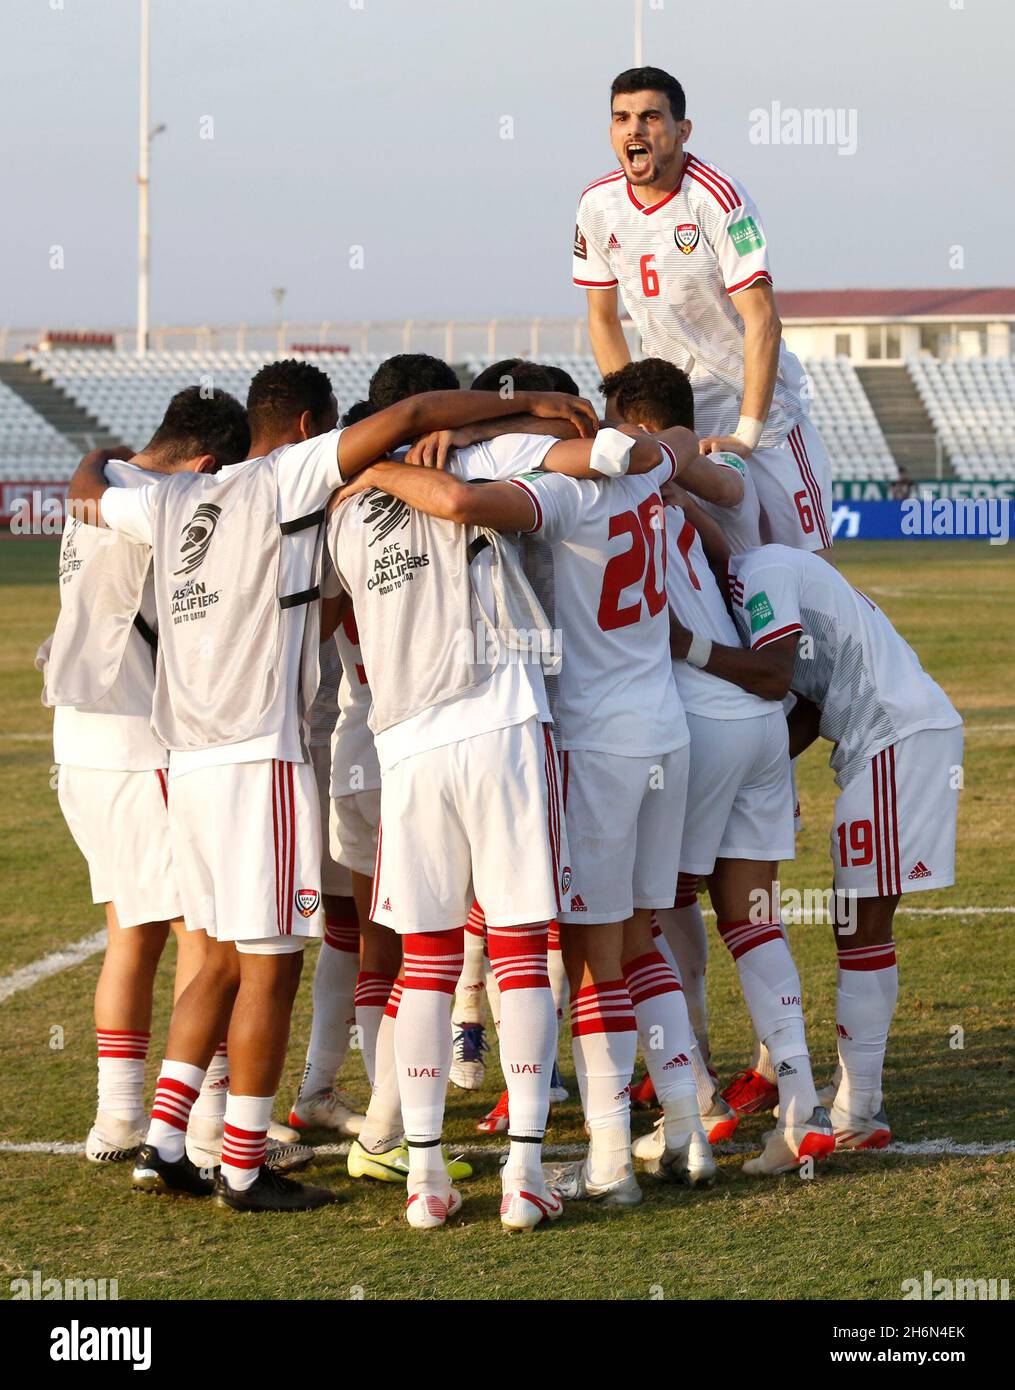 BEIRUT, Nov. 17, 2021 (Xinhua) -- Players of the United Arab Emirates celebrate during the 2022 Qatar World Cup Asian Qualifiers football match between Lebanon and the United Arab Emirates at the Saida Stadium in the city of Sidon, southern Lebanon, on Nov. 16, 2021. Stock Photo